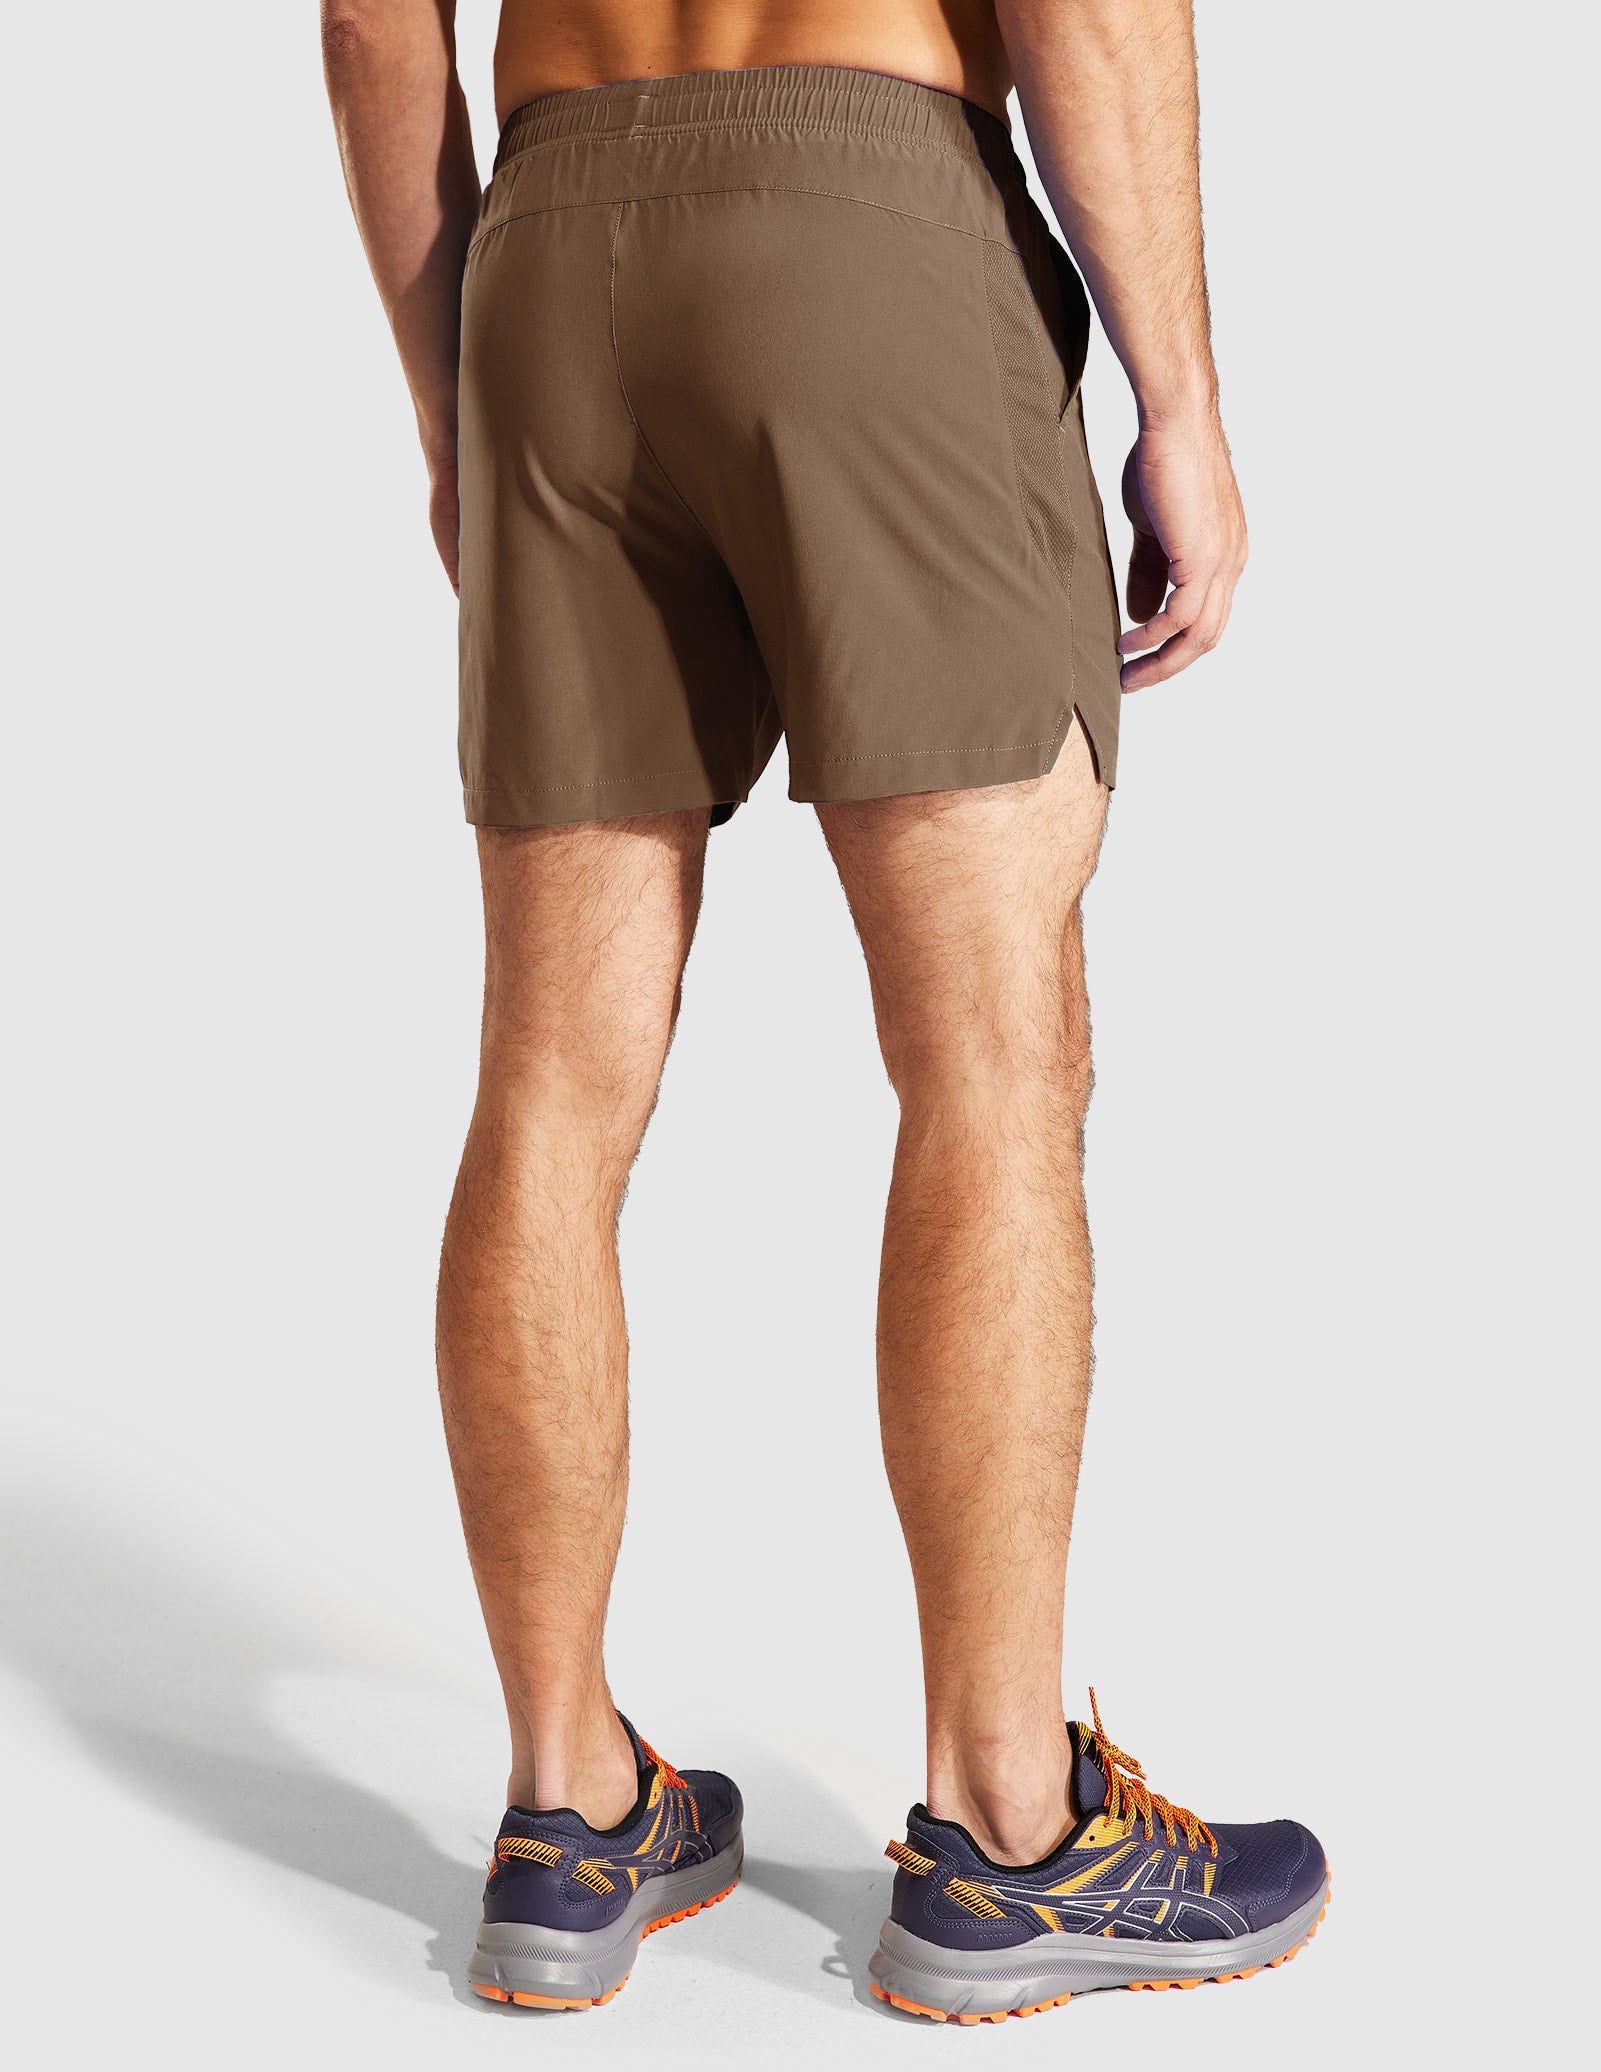 Men's Workout Shorts 5 Inches Running Shorts with Pockets